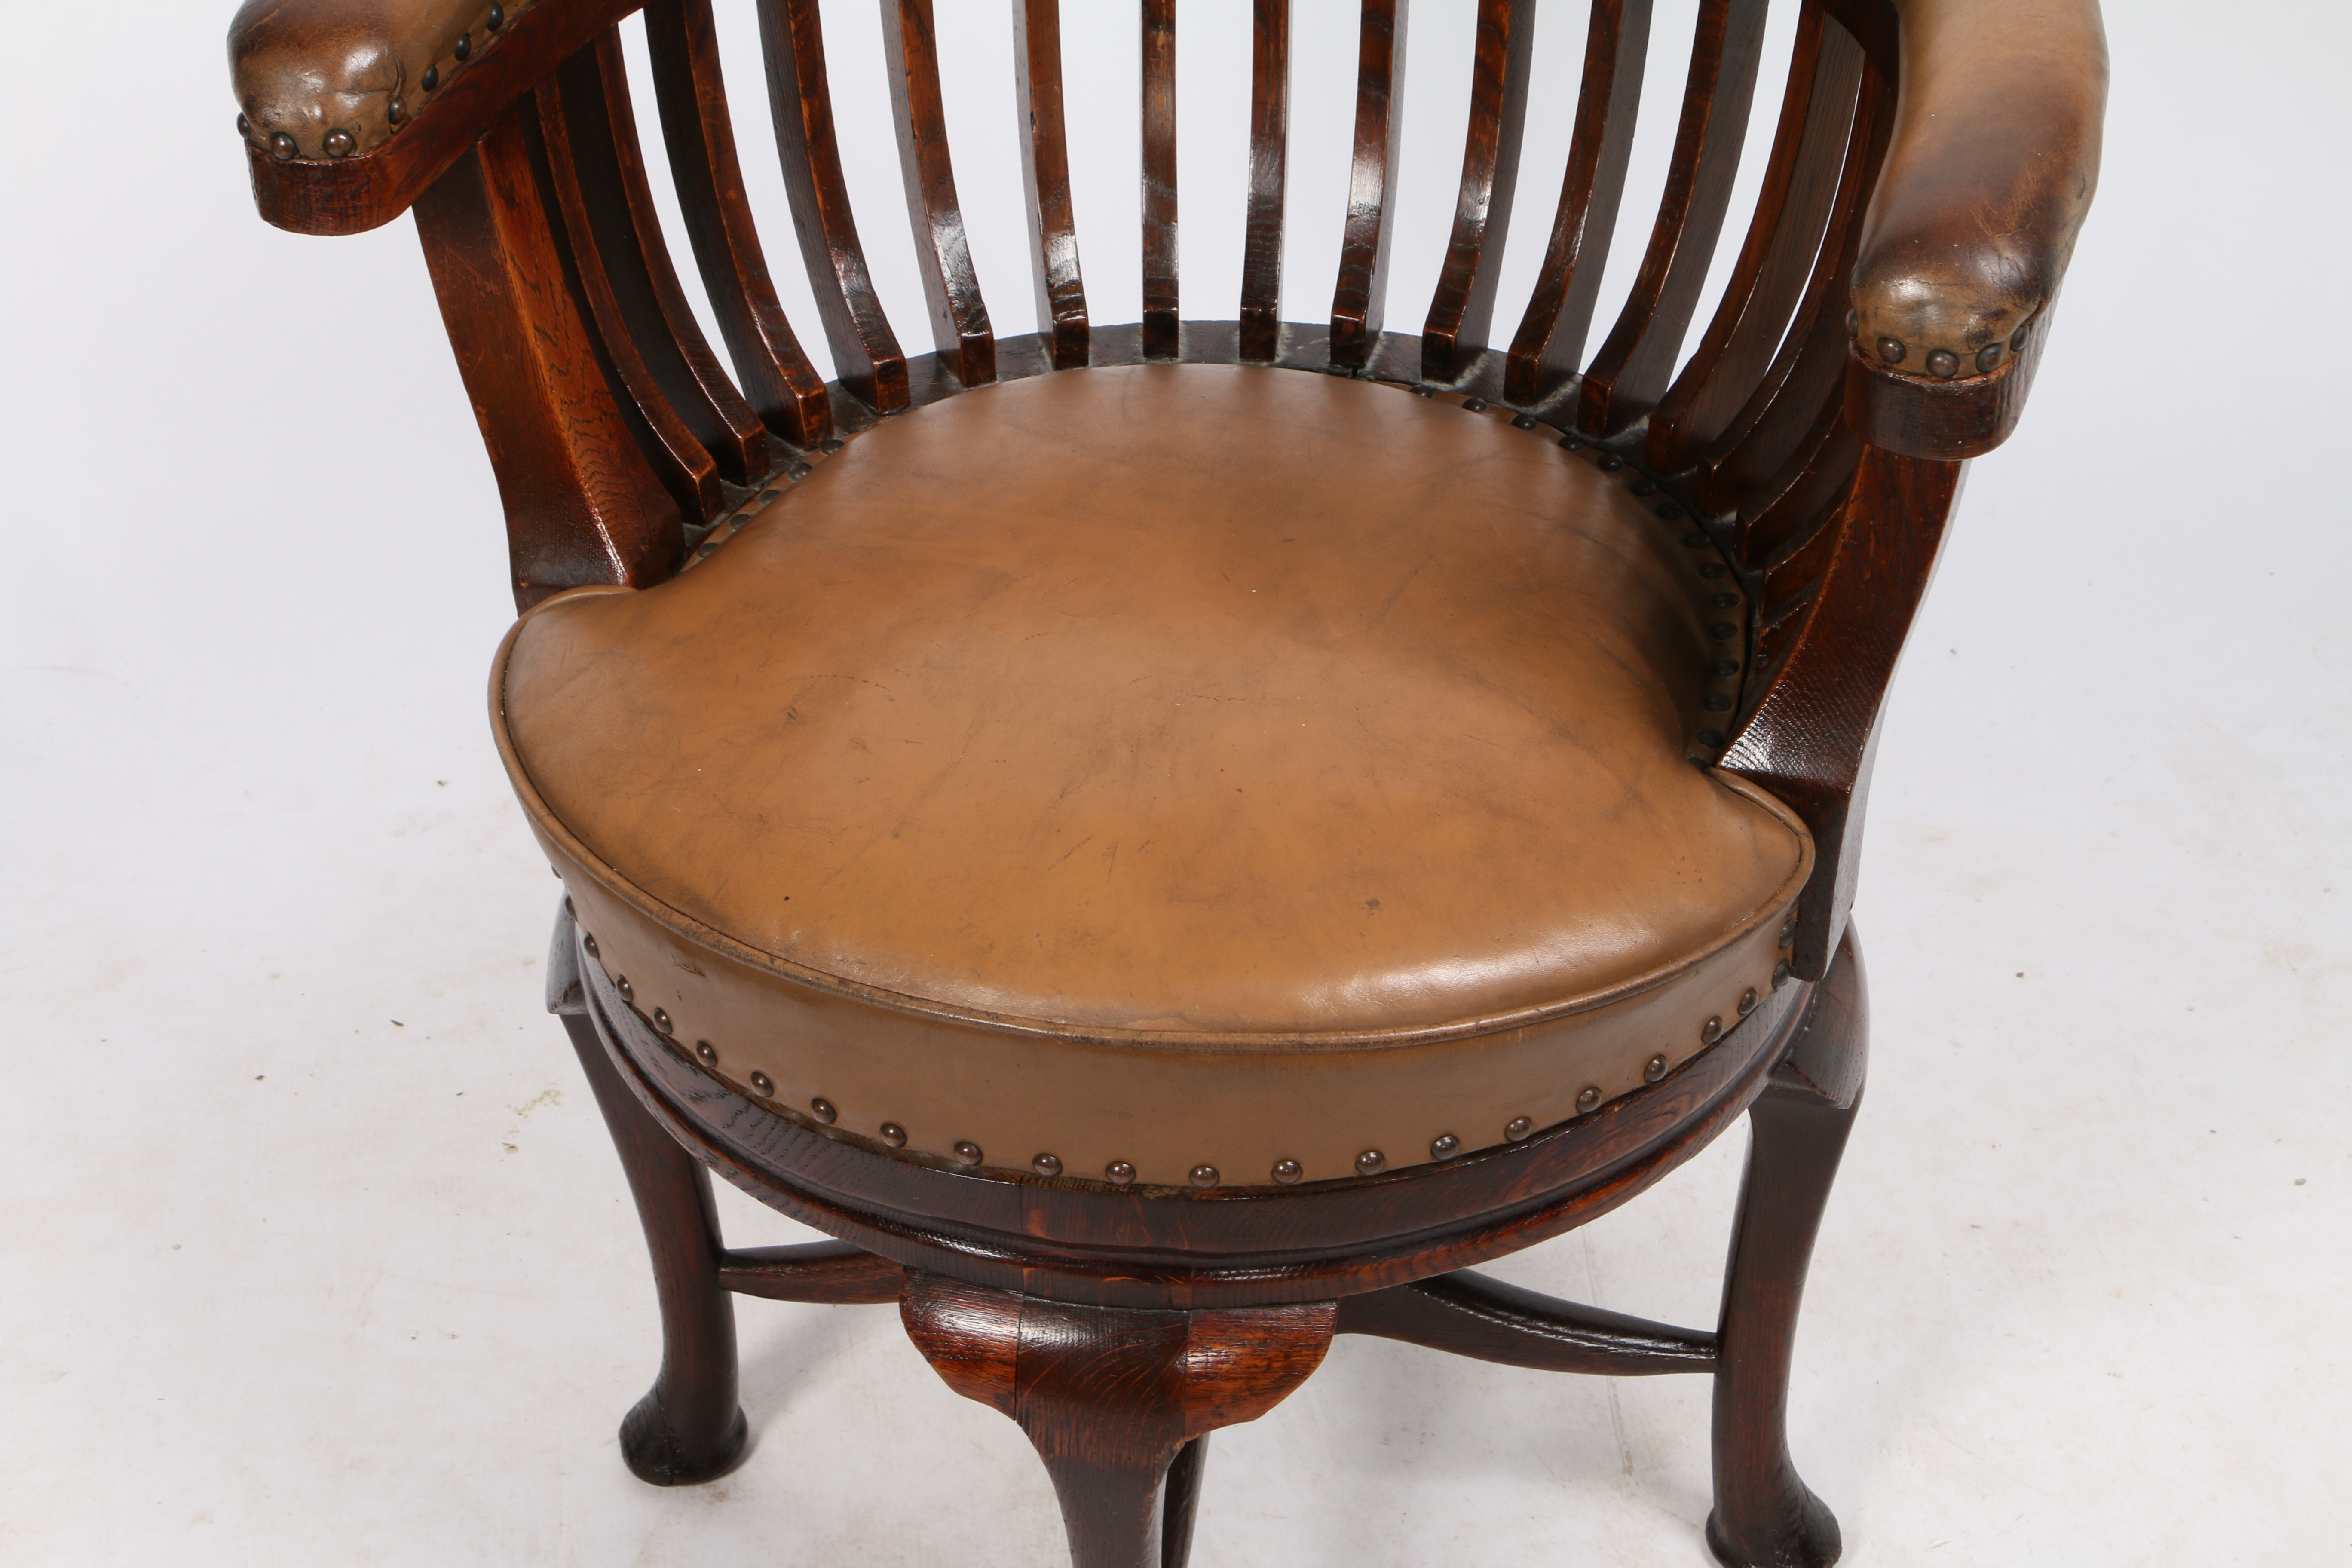 AN EARLY 20TH CENTURY OAK AND LEATHER CAPTAIN'S SWIVEL DESK CHAIR. - Image 3 of 7